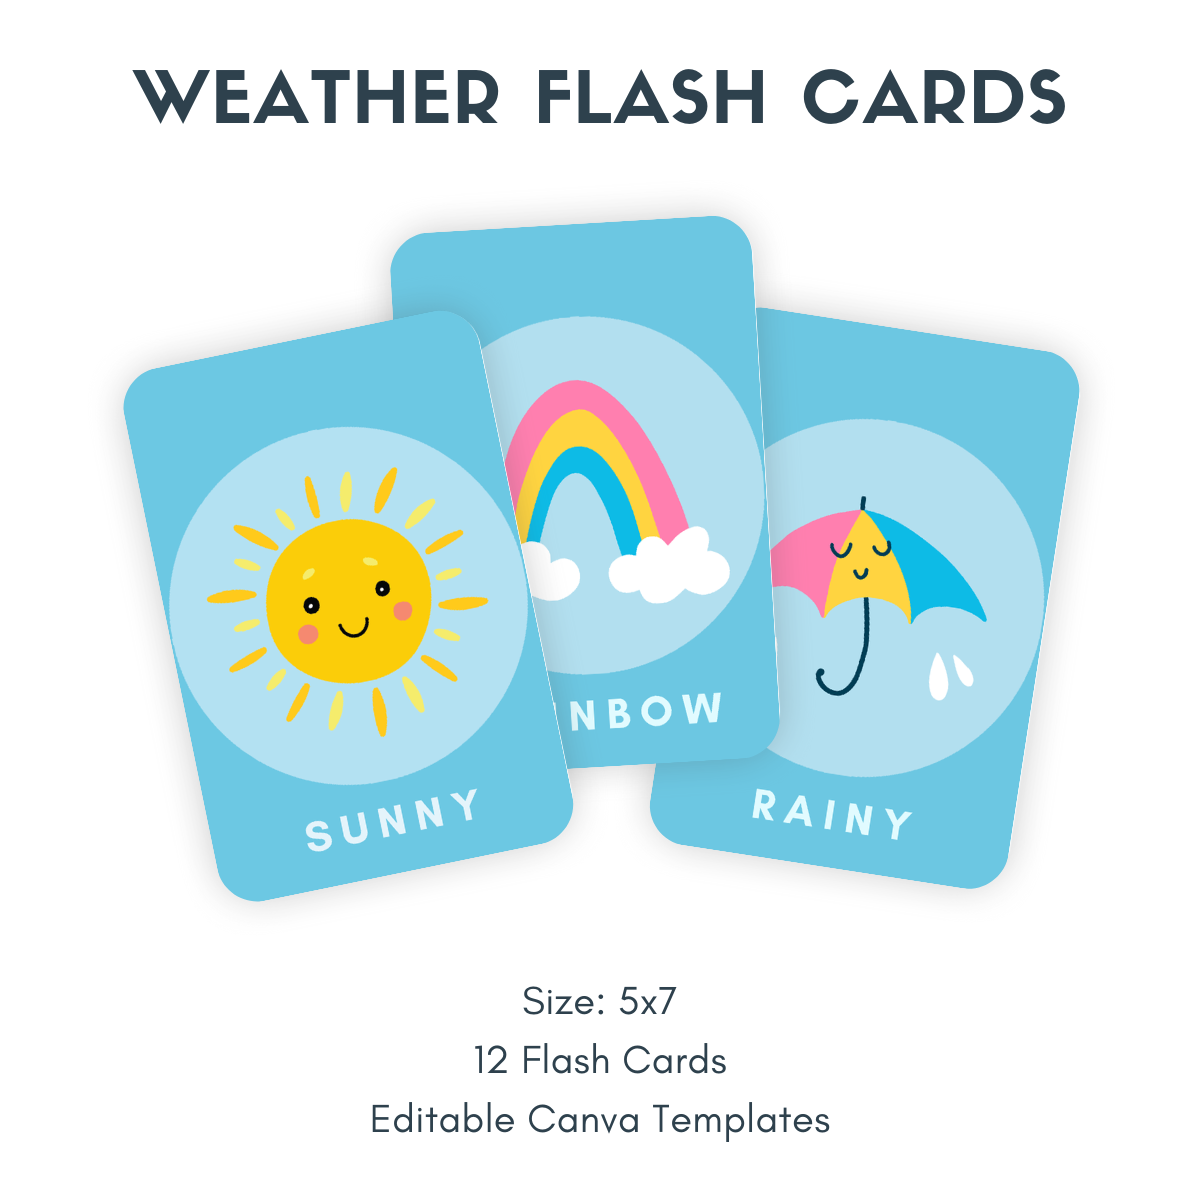 Niche in a Box: Printable Flash Cards